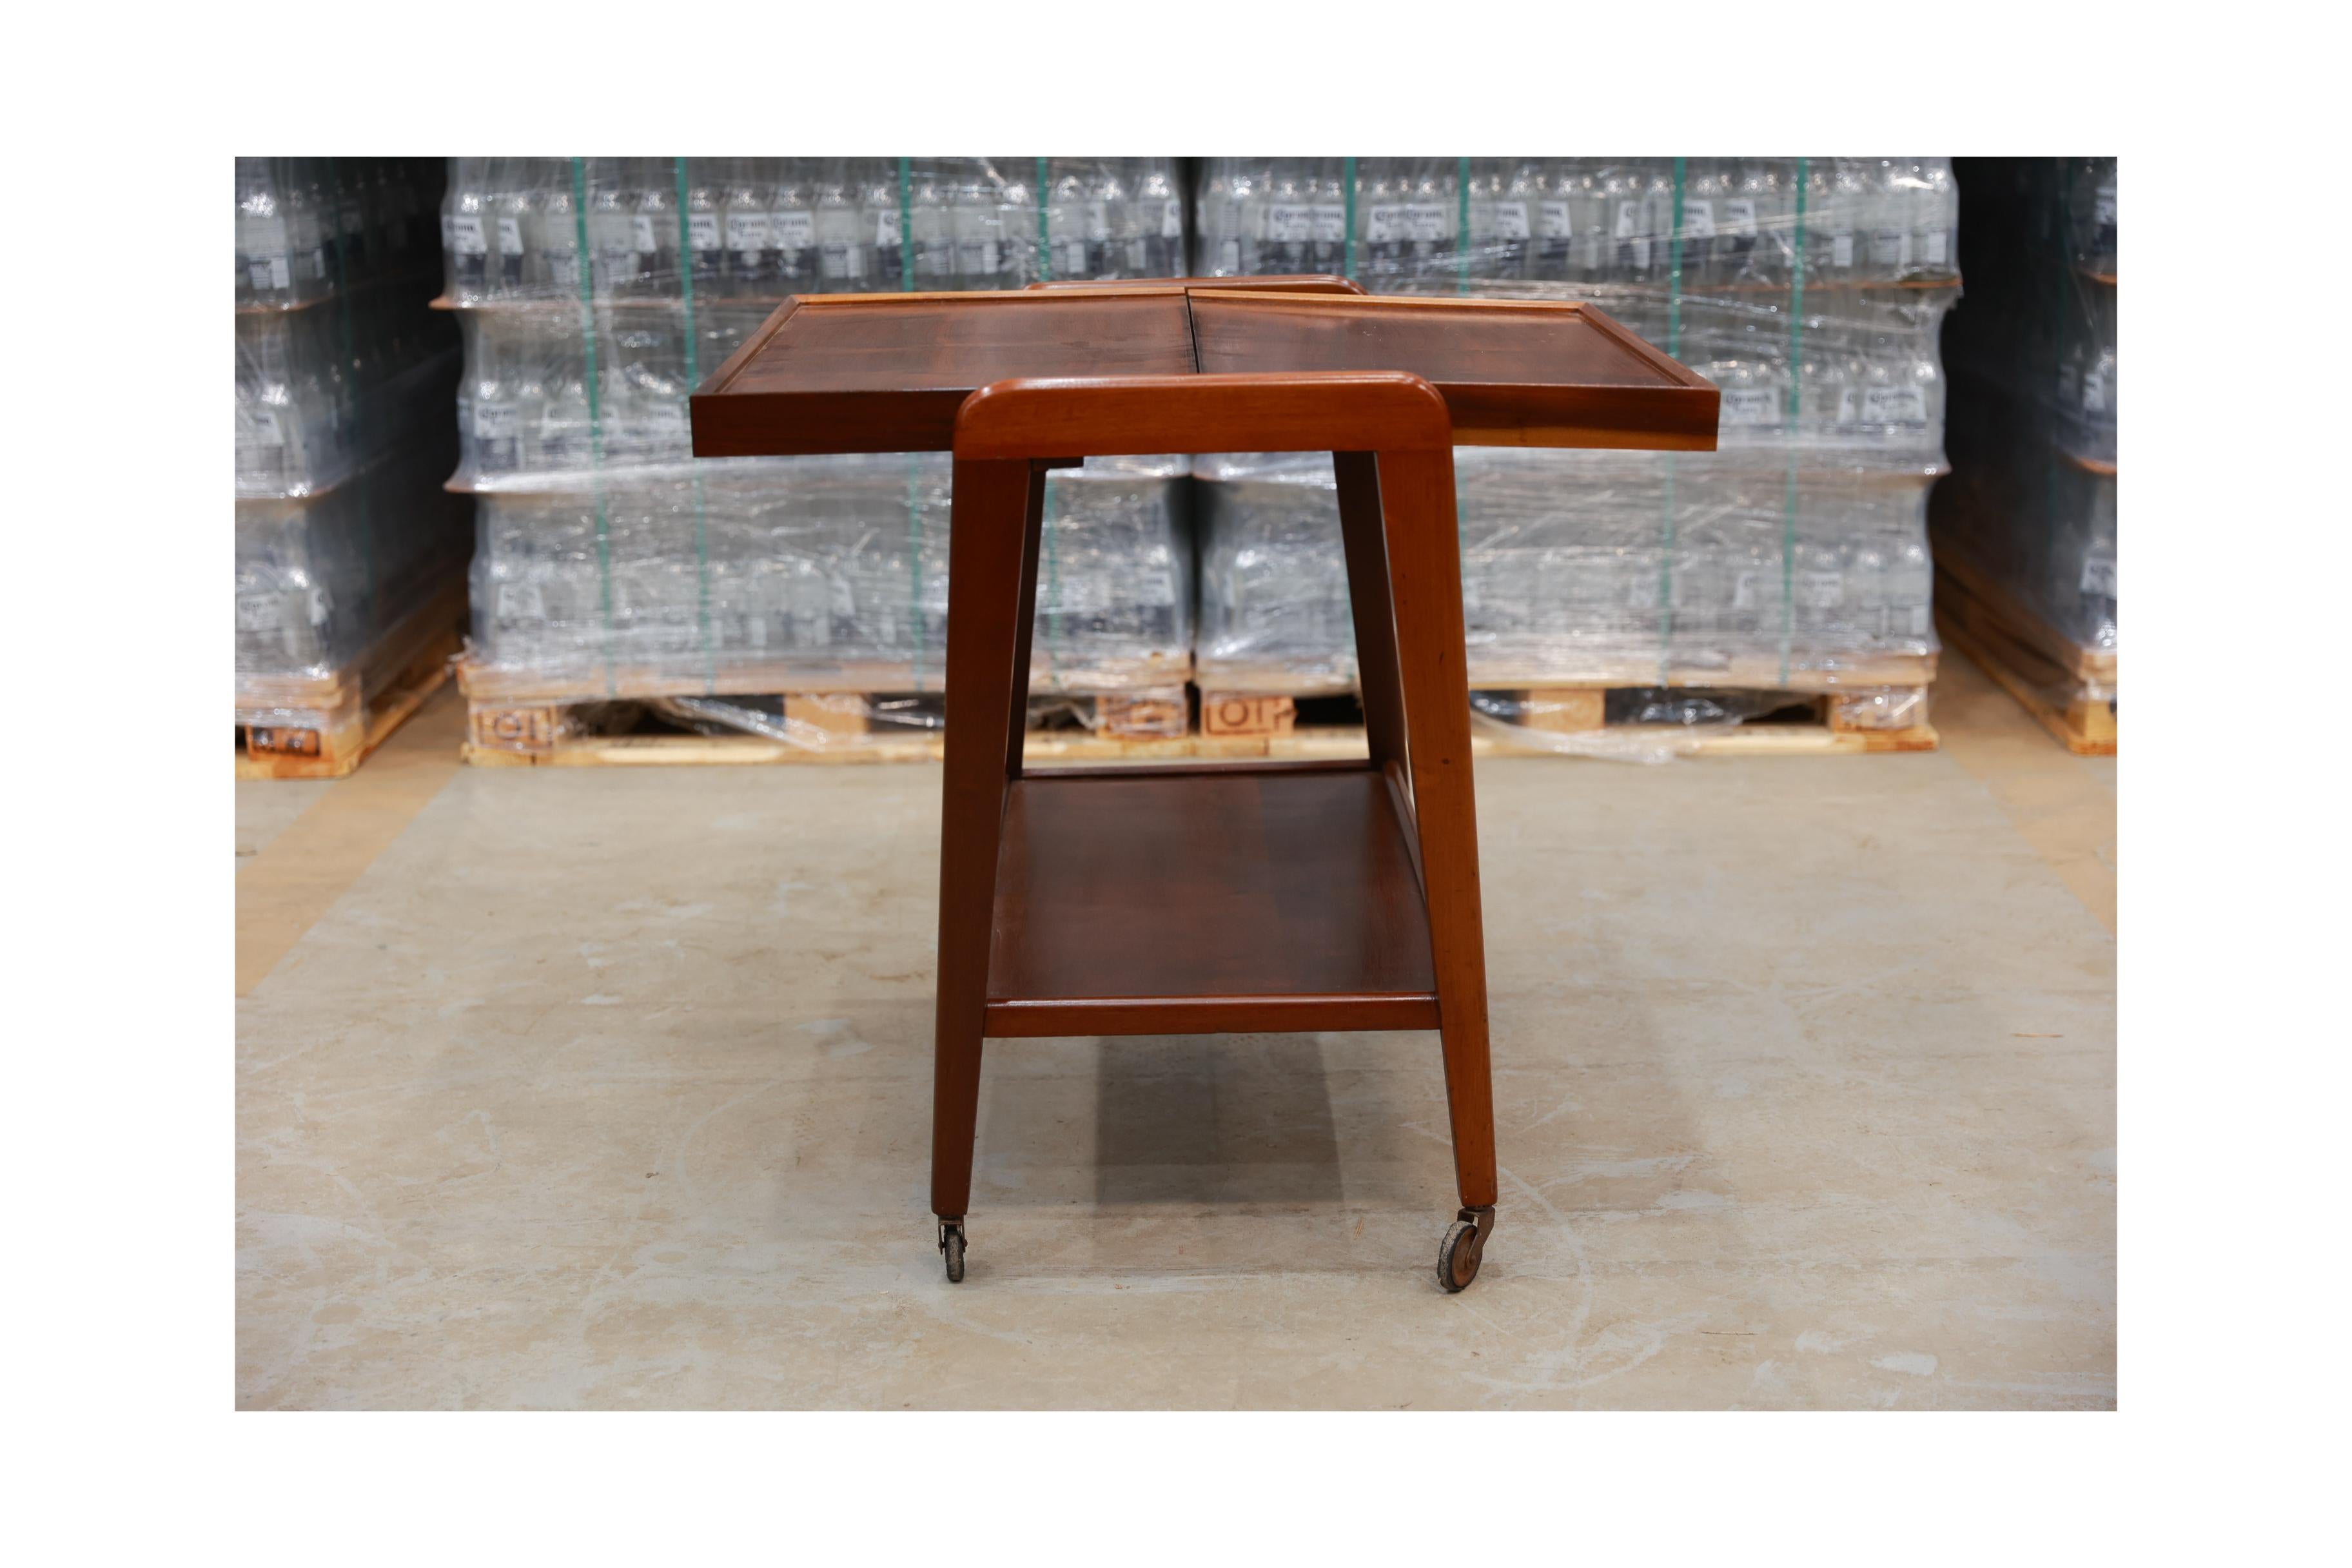 Hand-Painted Midcentury Modern Bar Cart in Hardwood & Brass by Ming Moveis, Brazil, 1950's For Sale